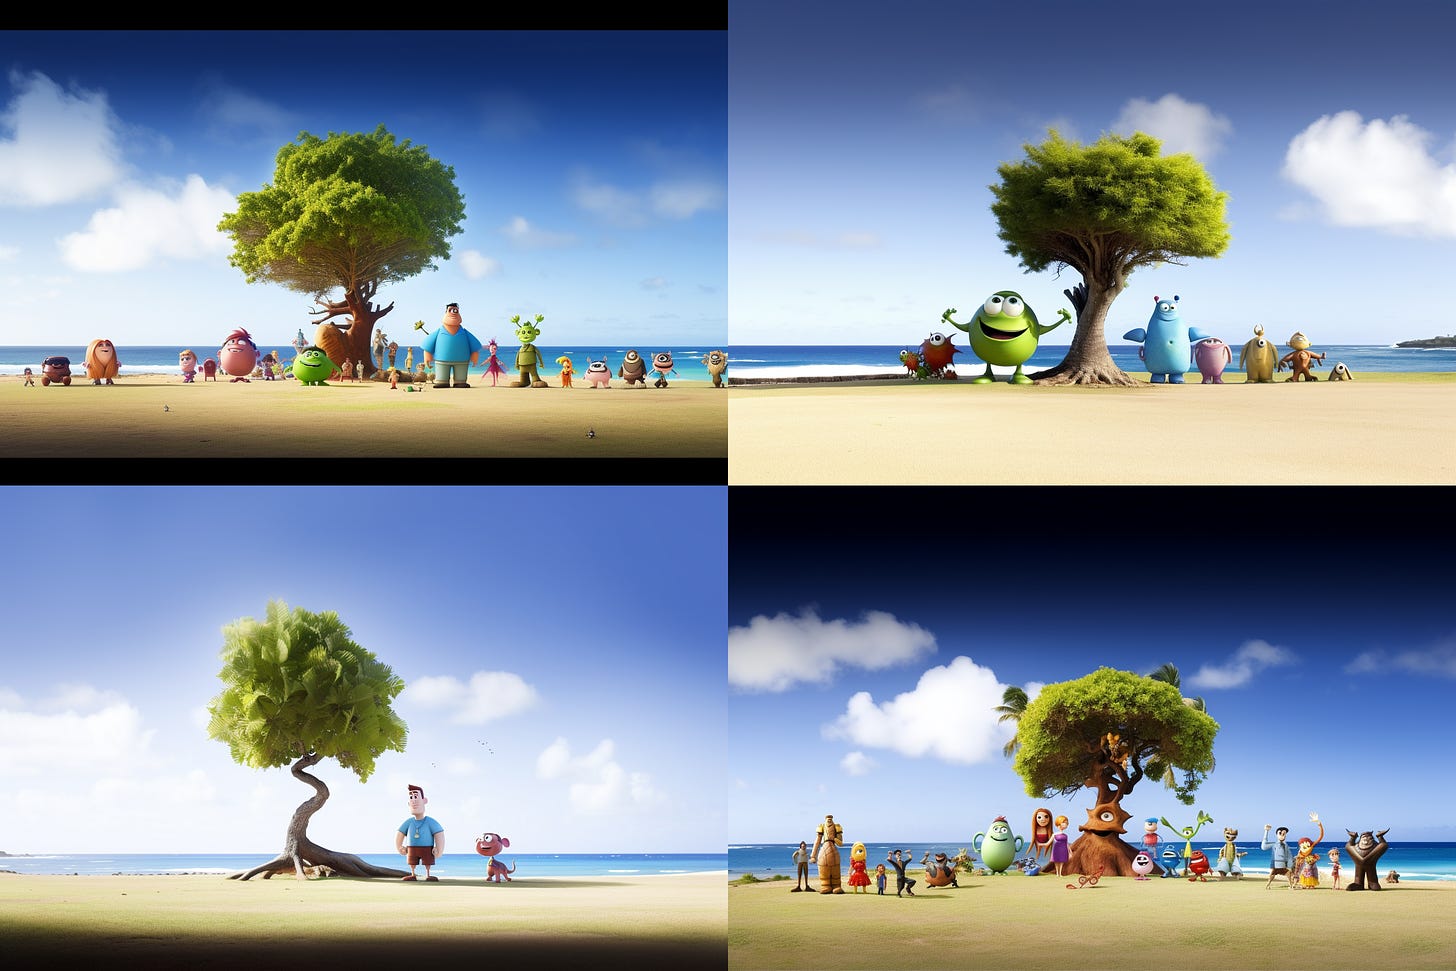 Midjourney Version 5 results for "Pixar cartoon" mixed with an image of a tree